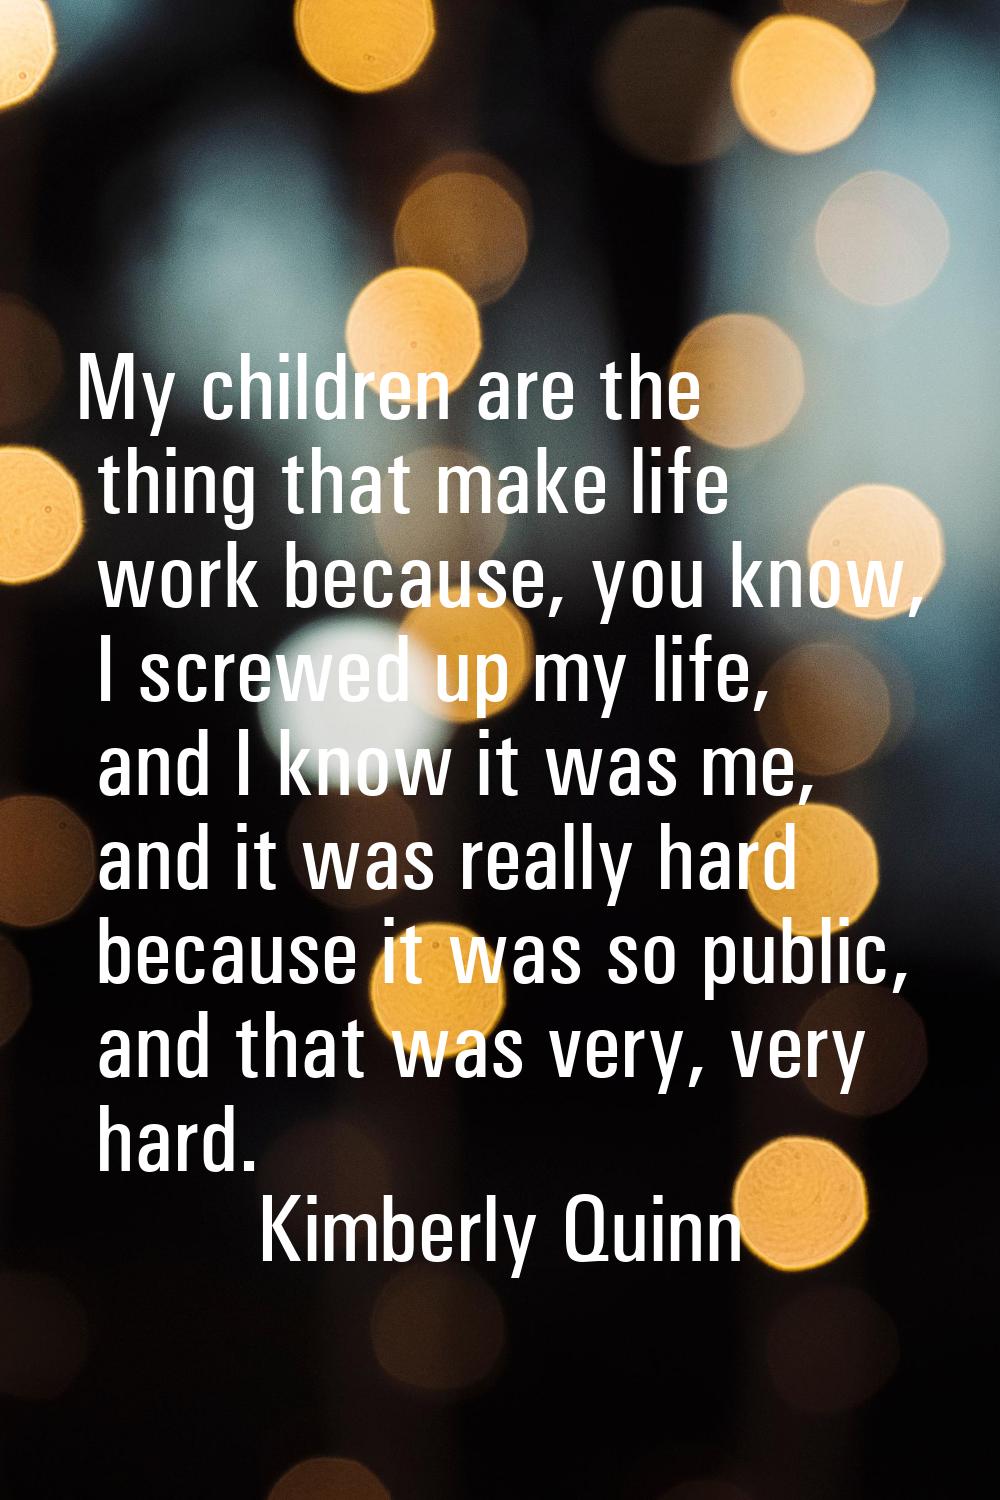 My children are the thing that make life work because, you know, I screwed up my life, and I know i